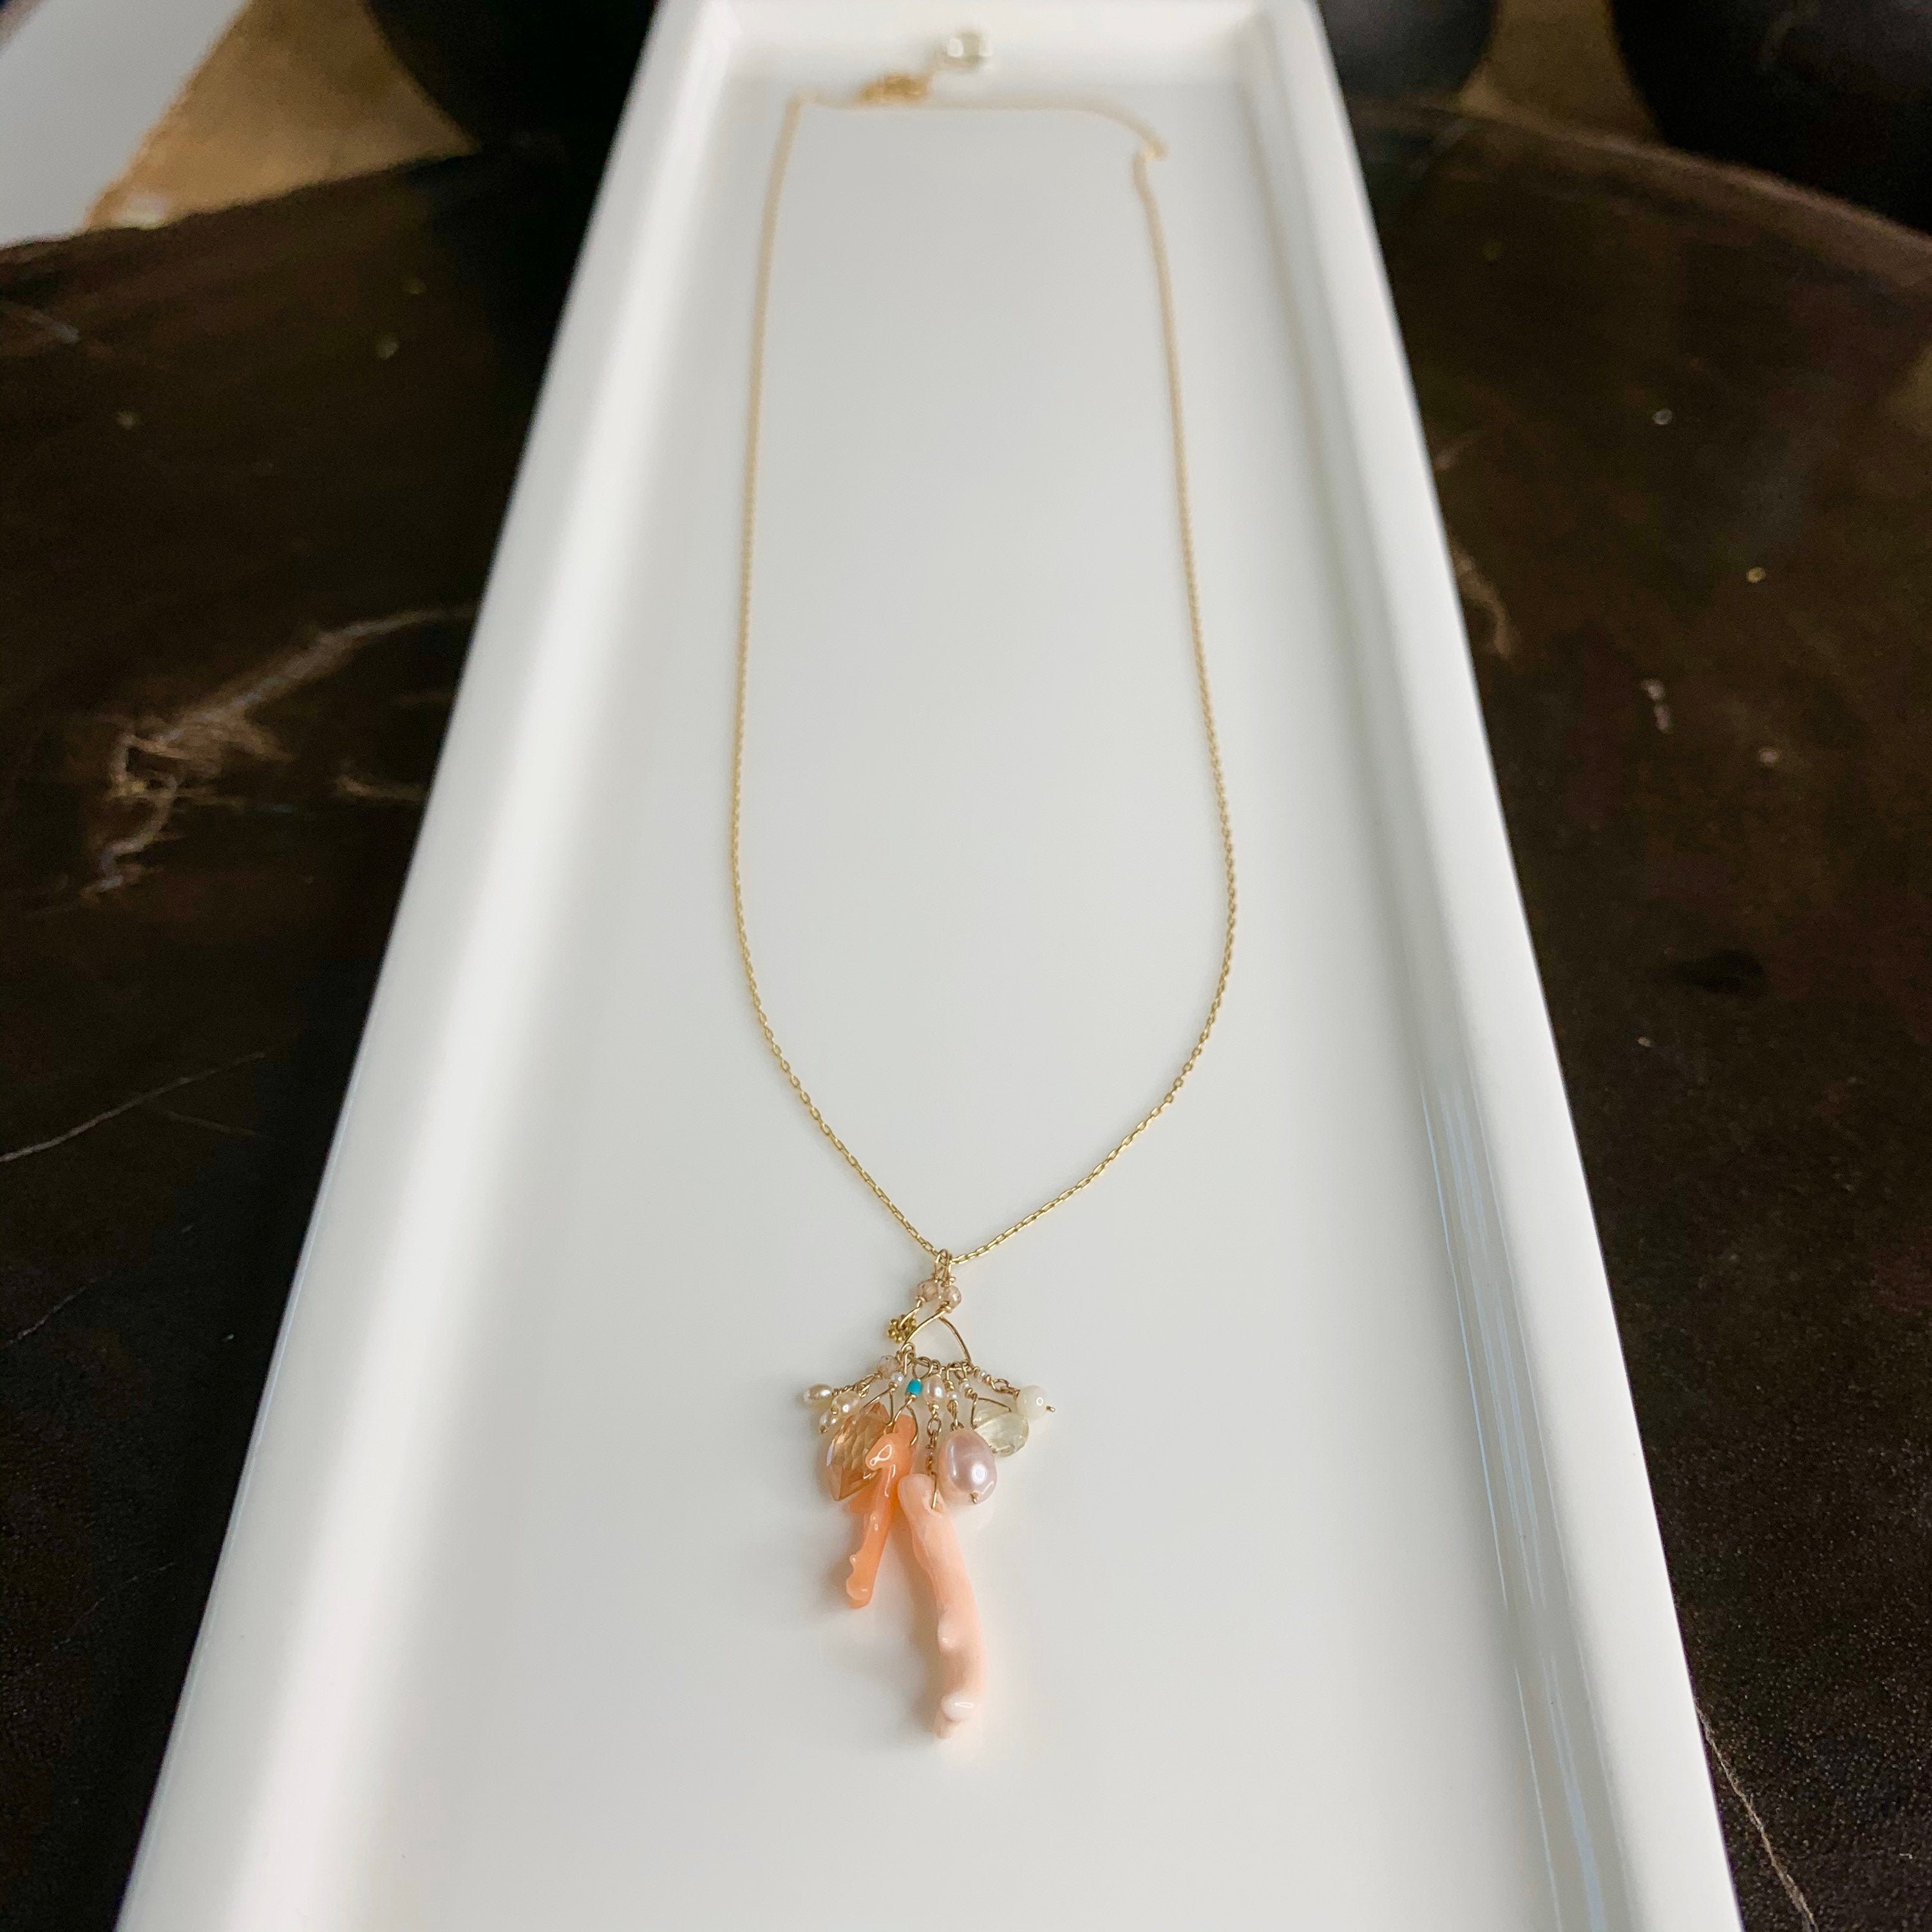 14k Gold Chain Necklace w/ 18k Gold Daisy, Coral, Freshwater Pearls, Cubic Zirconia, Quartz, Opal & Antique Italian Beads